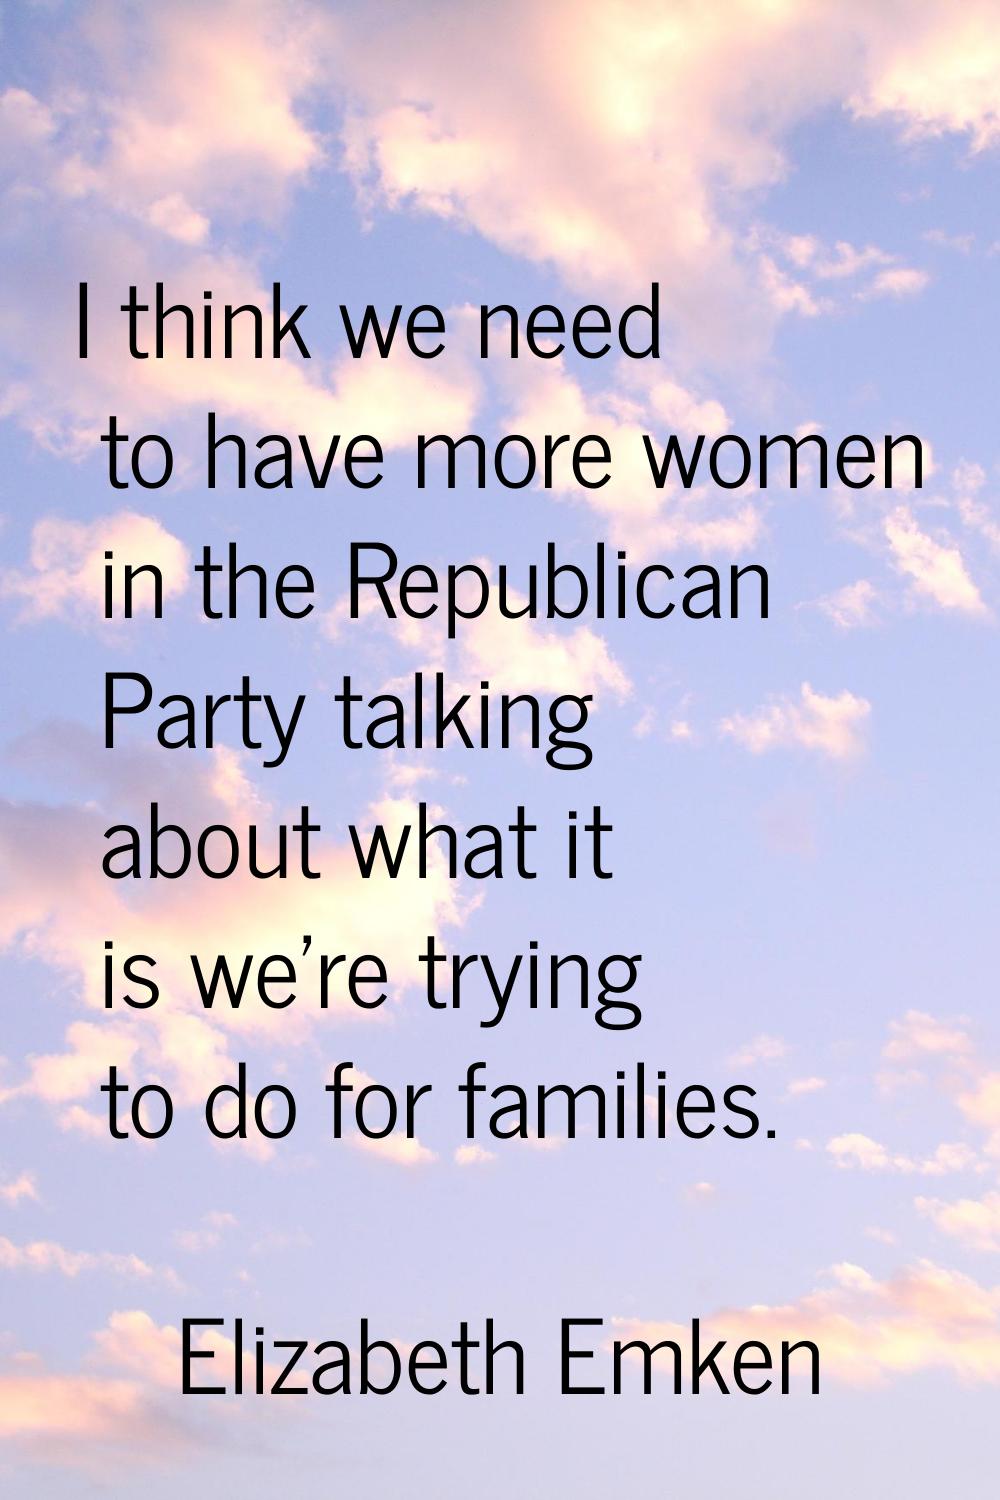 I think we need to have more women in the Republican Party talking about what it is we're trying to